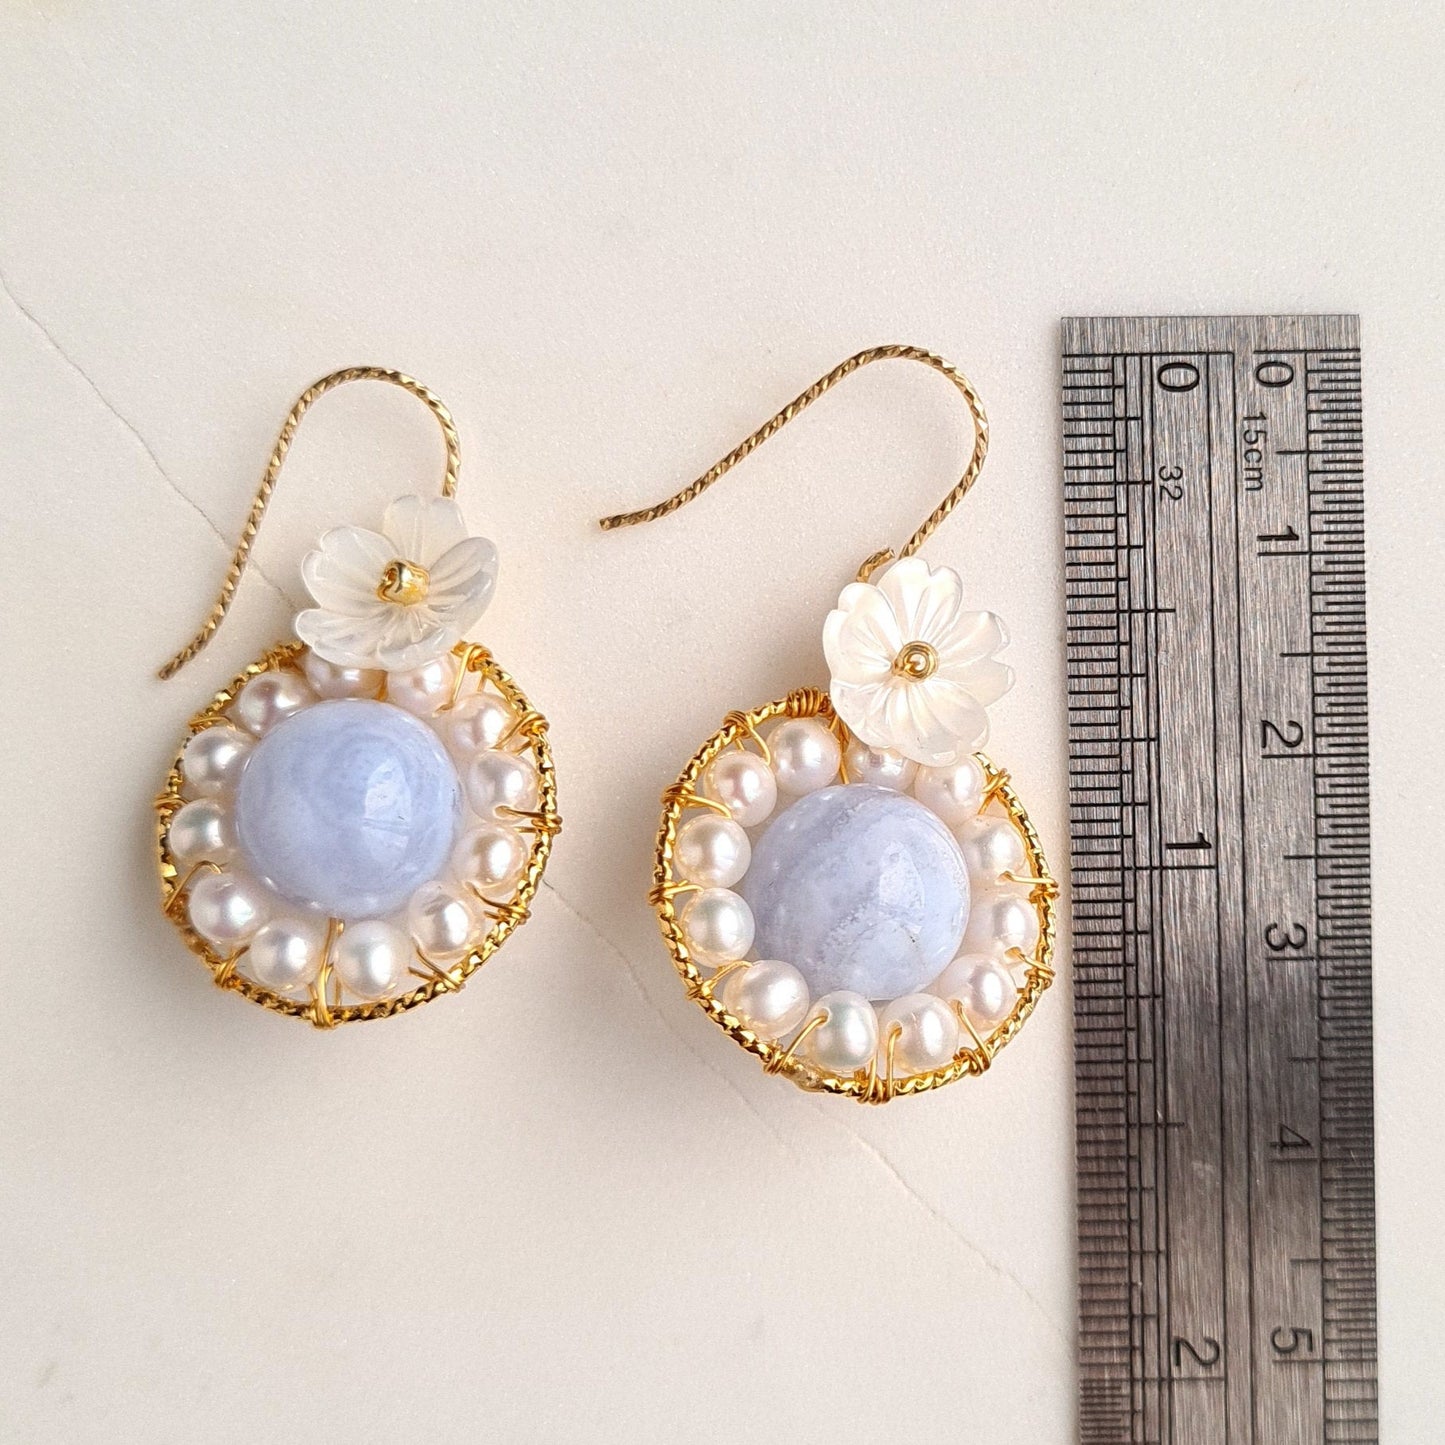 Round Fresh Water Pearl with Blue Lace Agate Gemstone & Flower Mother Of Pearl Earrings